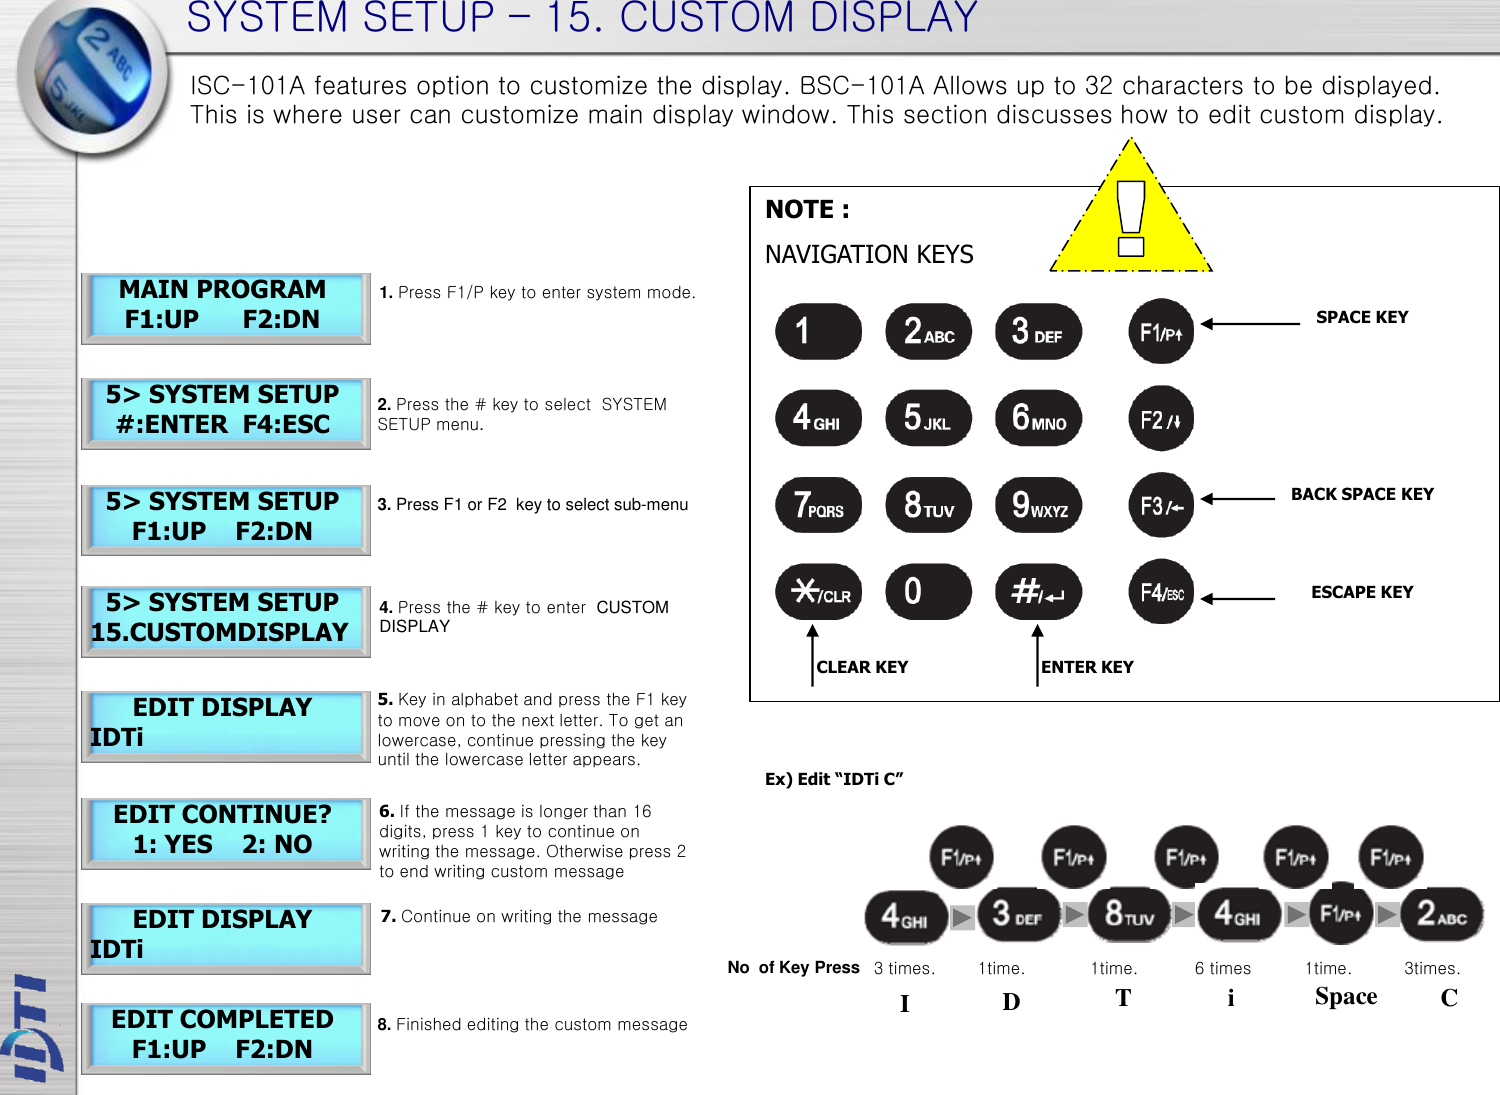 SYSTEM SETUP – 15. CUSTOM DISPLAY EDIT DISPLAY IDTi 5. Key in alphabet and press the F1 key to move on to the next letter. To get an lowercase, continue pressing the key until the lowercase letter appears.  6. If the message is longer than 16 digits, press 1 key to continue on writing the message. Otherwise press 2 to end writing custom message EDIT COMPLETED F1:UP    F2:DN 5&gt; SYSTEM SETUP 15.CUSTOMDISPLAY MAIN PROGRAM F1:UP      F2:DN 5&gt; SYSTEM SETUP #:ENTER  F4:ESC 5&gt; SYSTEM SETUP F1:UP    F2:DN EDIT CONTINUE? 1: YES    2: NO EDIT DISPLAY IDTi 7. Continue on writing the message NOTE : NAVIGATION KEYS               SPACE KEY CLEAR KEY ENTER KEY ESCAPE KEY BACK SPACE KEY ISC-101A features option to customize the display. BSC-101A Allows up to 32 characters to be displayed. This is where user can customize main display window. This section discusses how to edit custom display. 1. Press F1/P key to enter system mode. 2. Press the # key to select  SYSTEM SETUP menu. 4. Press the # key to enter  CUSTOM DISPLAY 3. Press F1 or F2  key to select sub-menu Ex) Edit “IDTi C” 8. Finished editing the custom message 3 times.  1time.  1time.  6 times  3times. 1time. I  D  T  i  Space  C No  of Key Press 